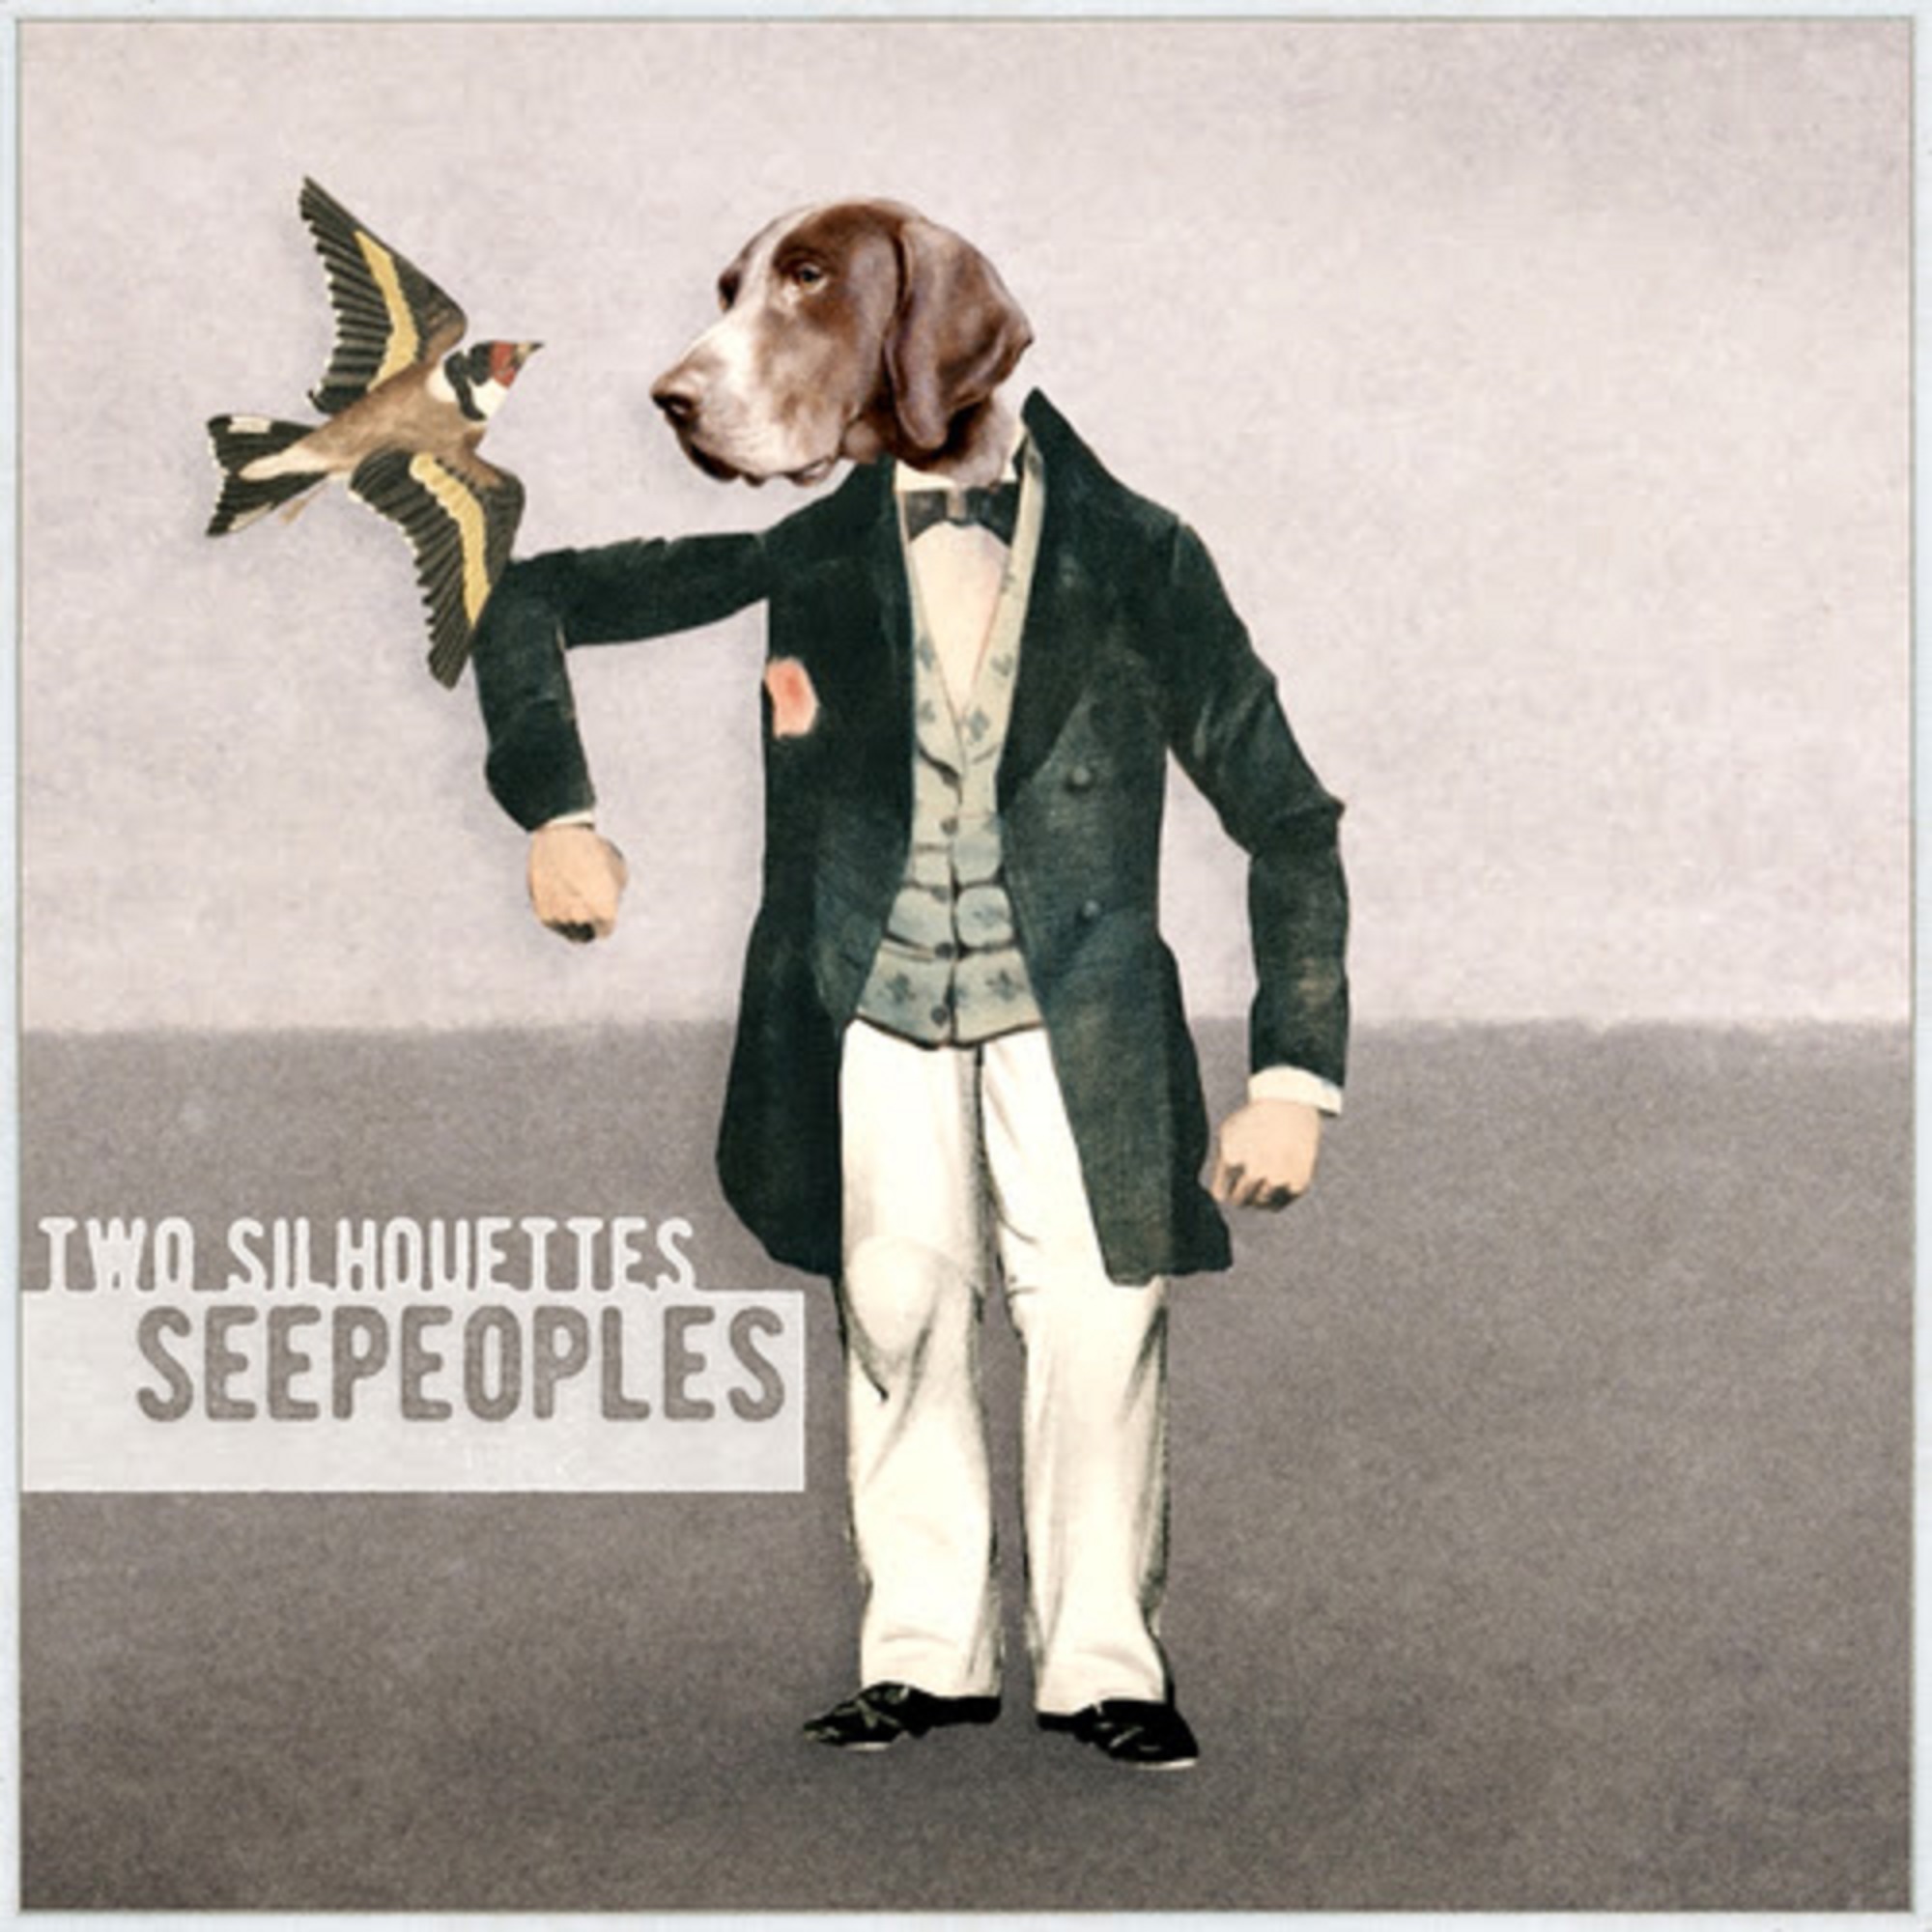 SeepeopleS releases new single & video "Two Silhouettes"